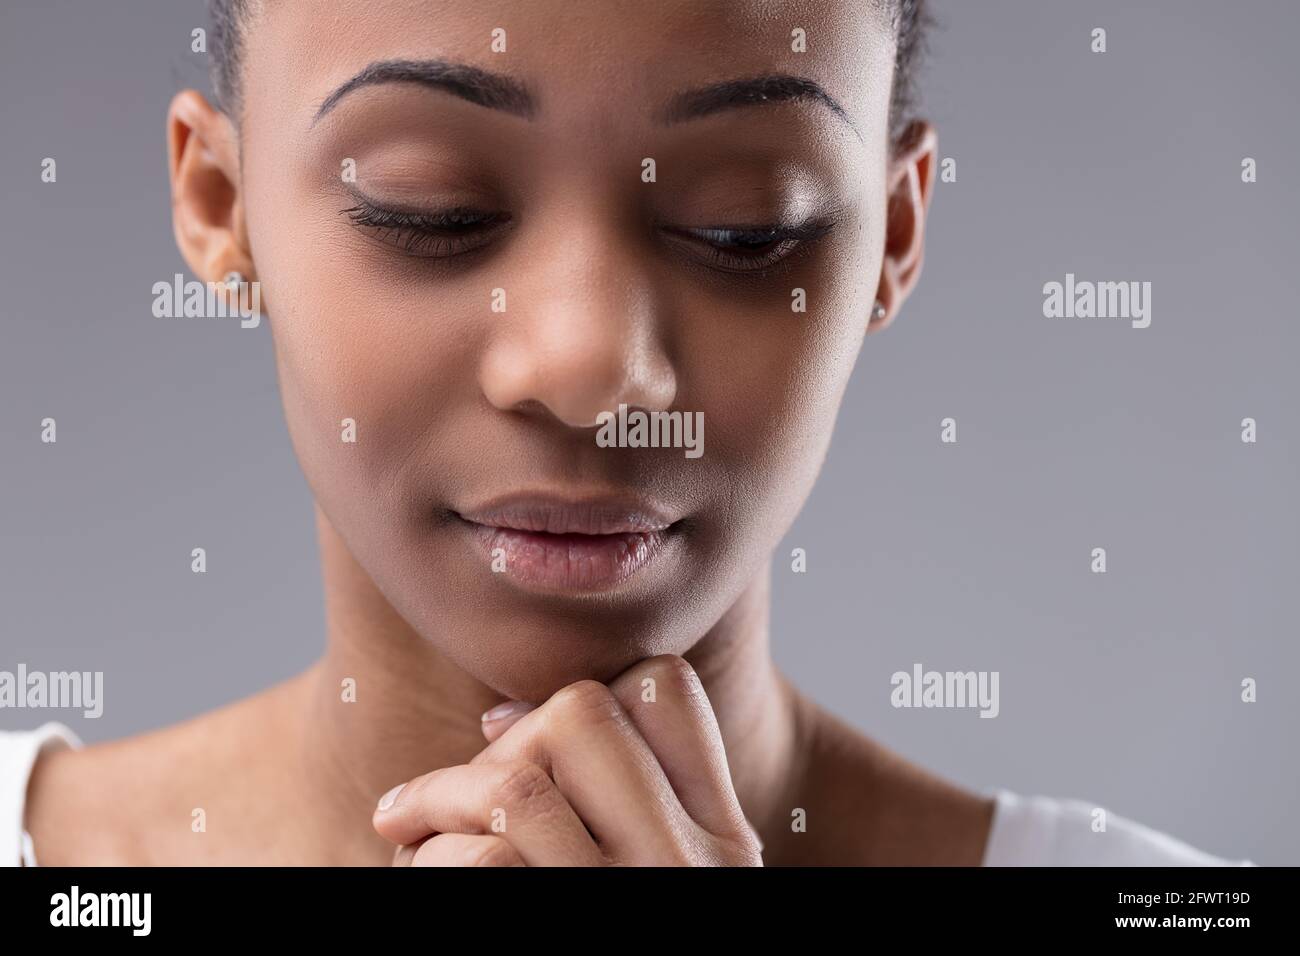 Cropped portrait of the face of a serious young Black woman with downcast eyes glancing to the side with her hand to her chin Stock Photo